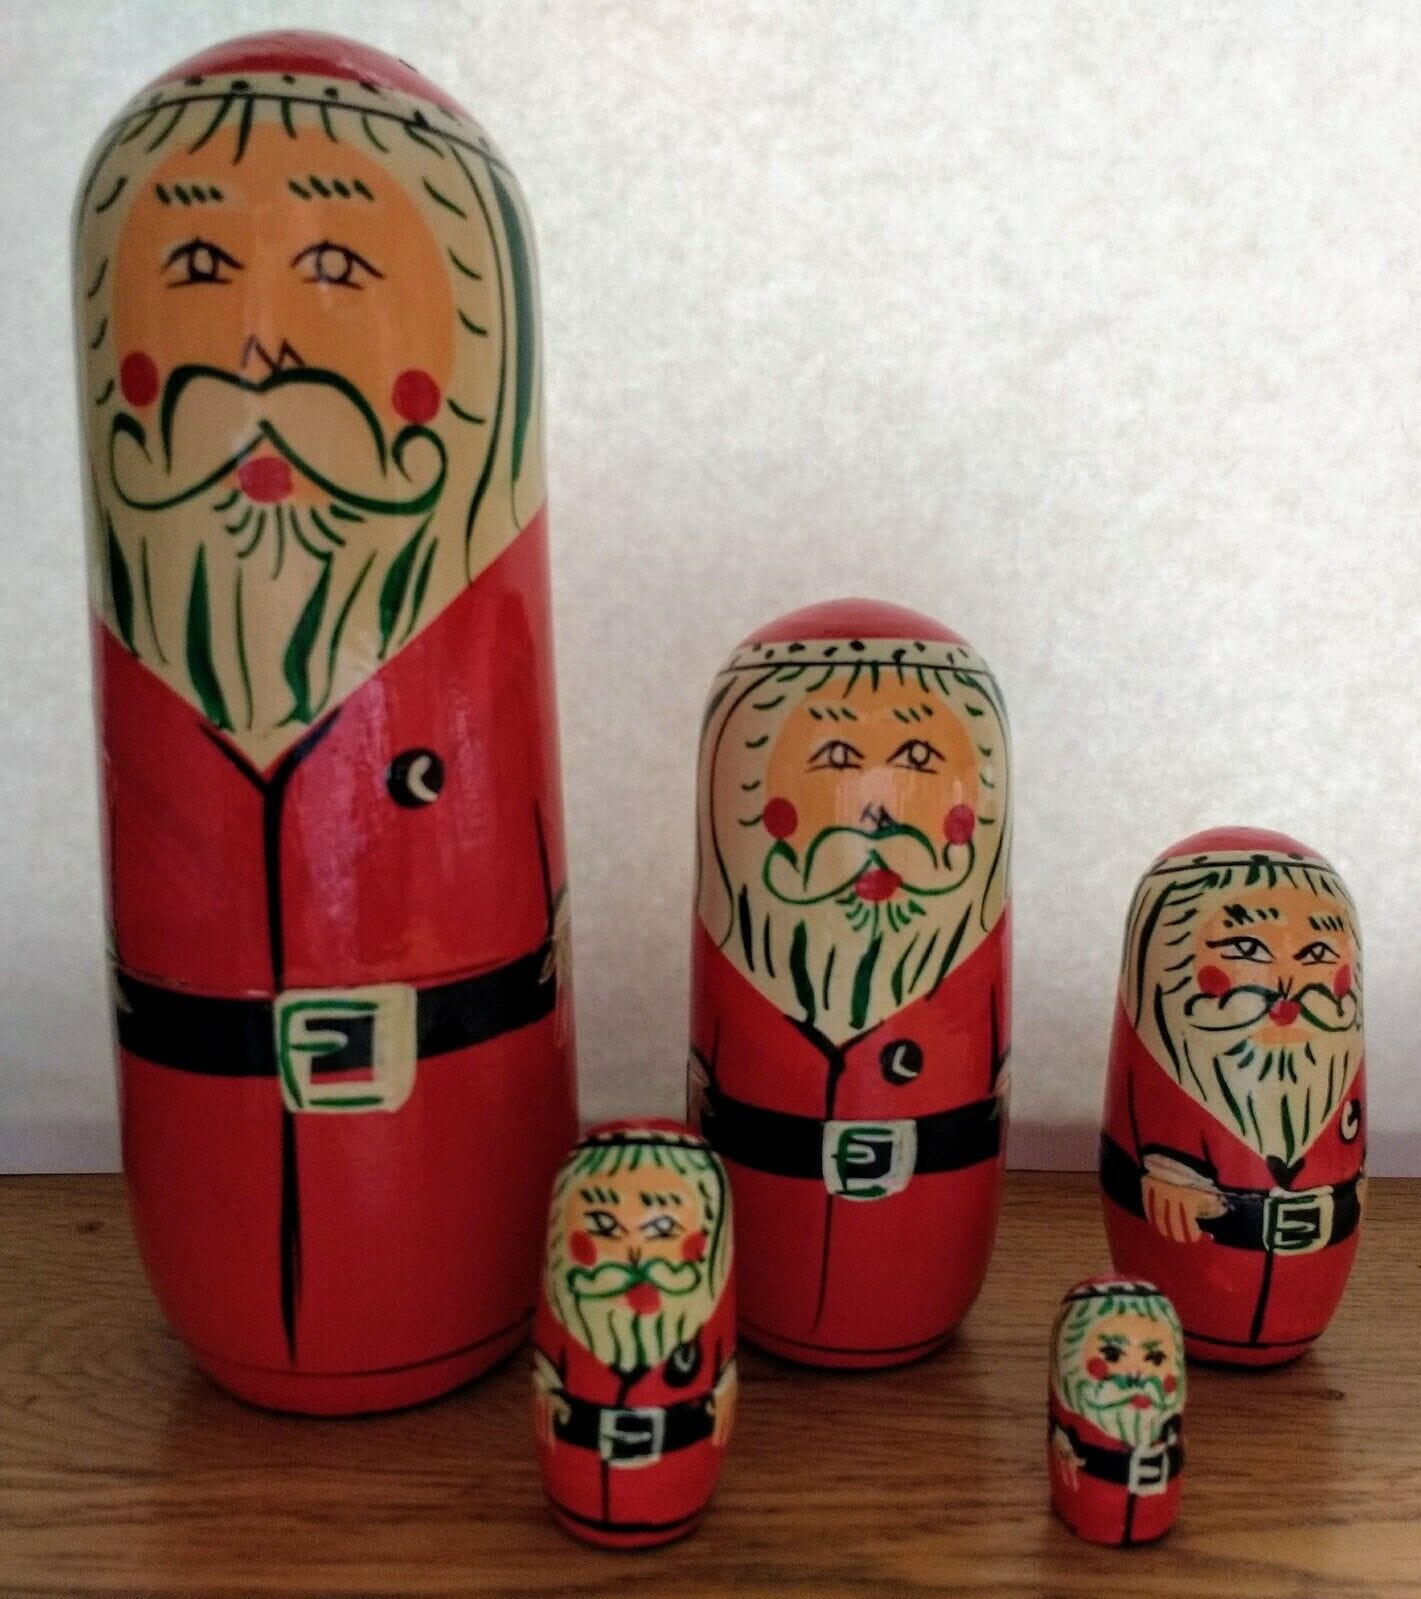 New Santa Claus Hand Painted Matryoshka Wooden Collectors Dolls @ Only £13.95p ! - Picture 2 of 7